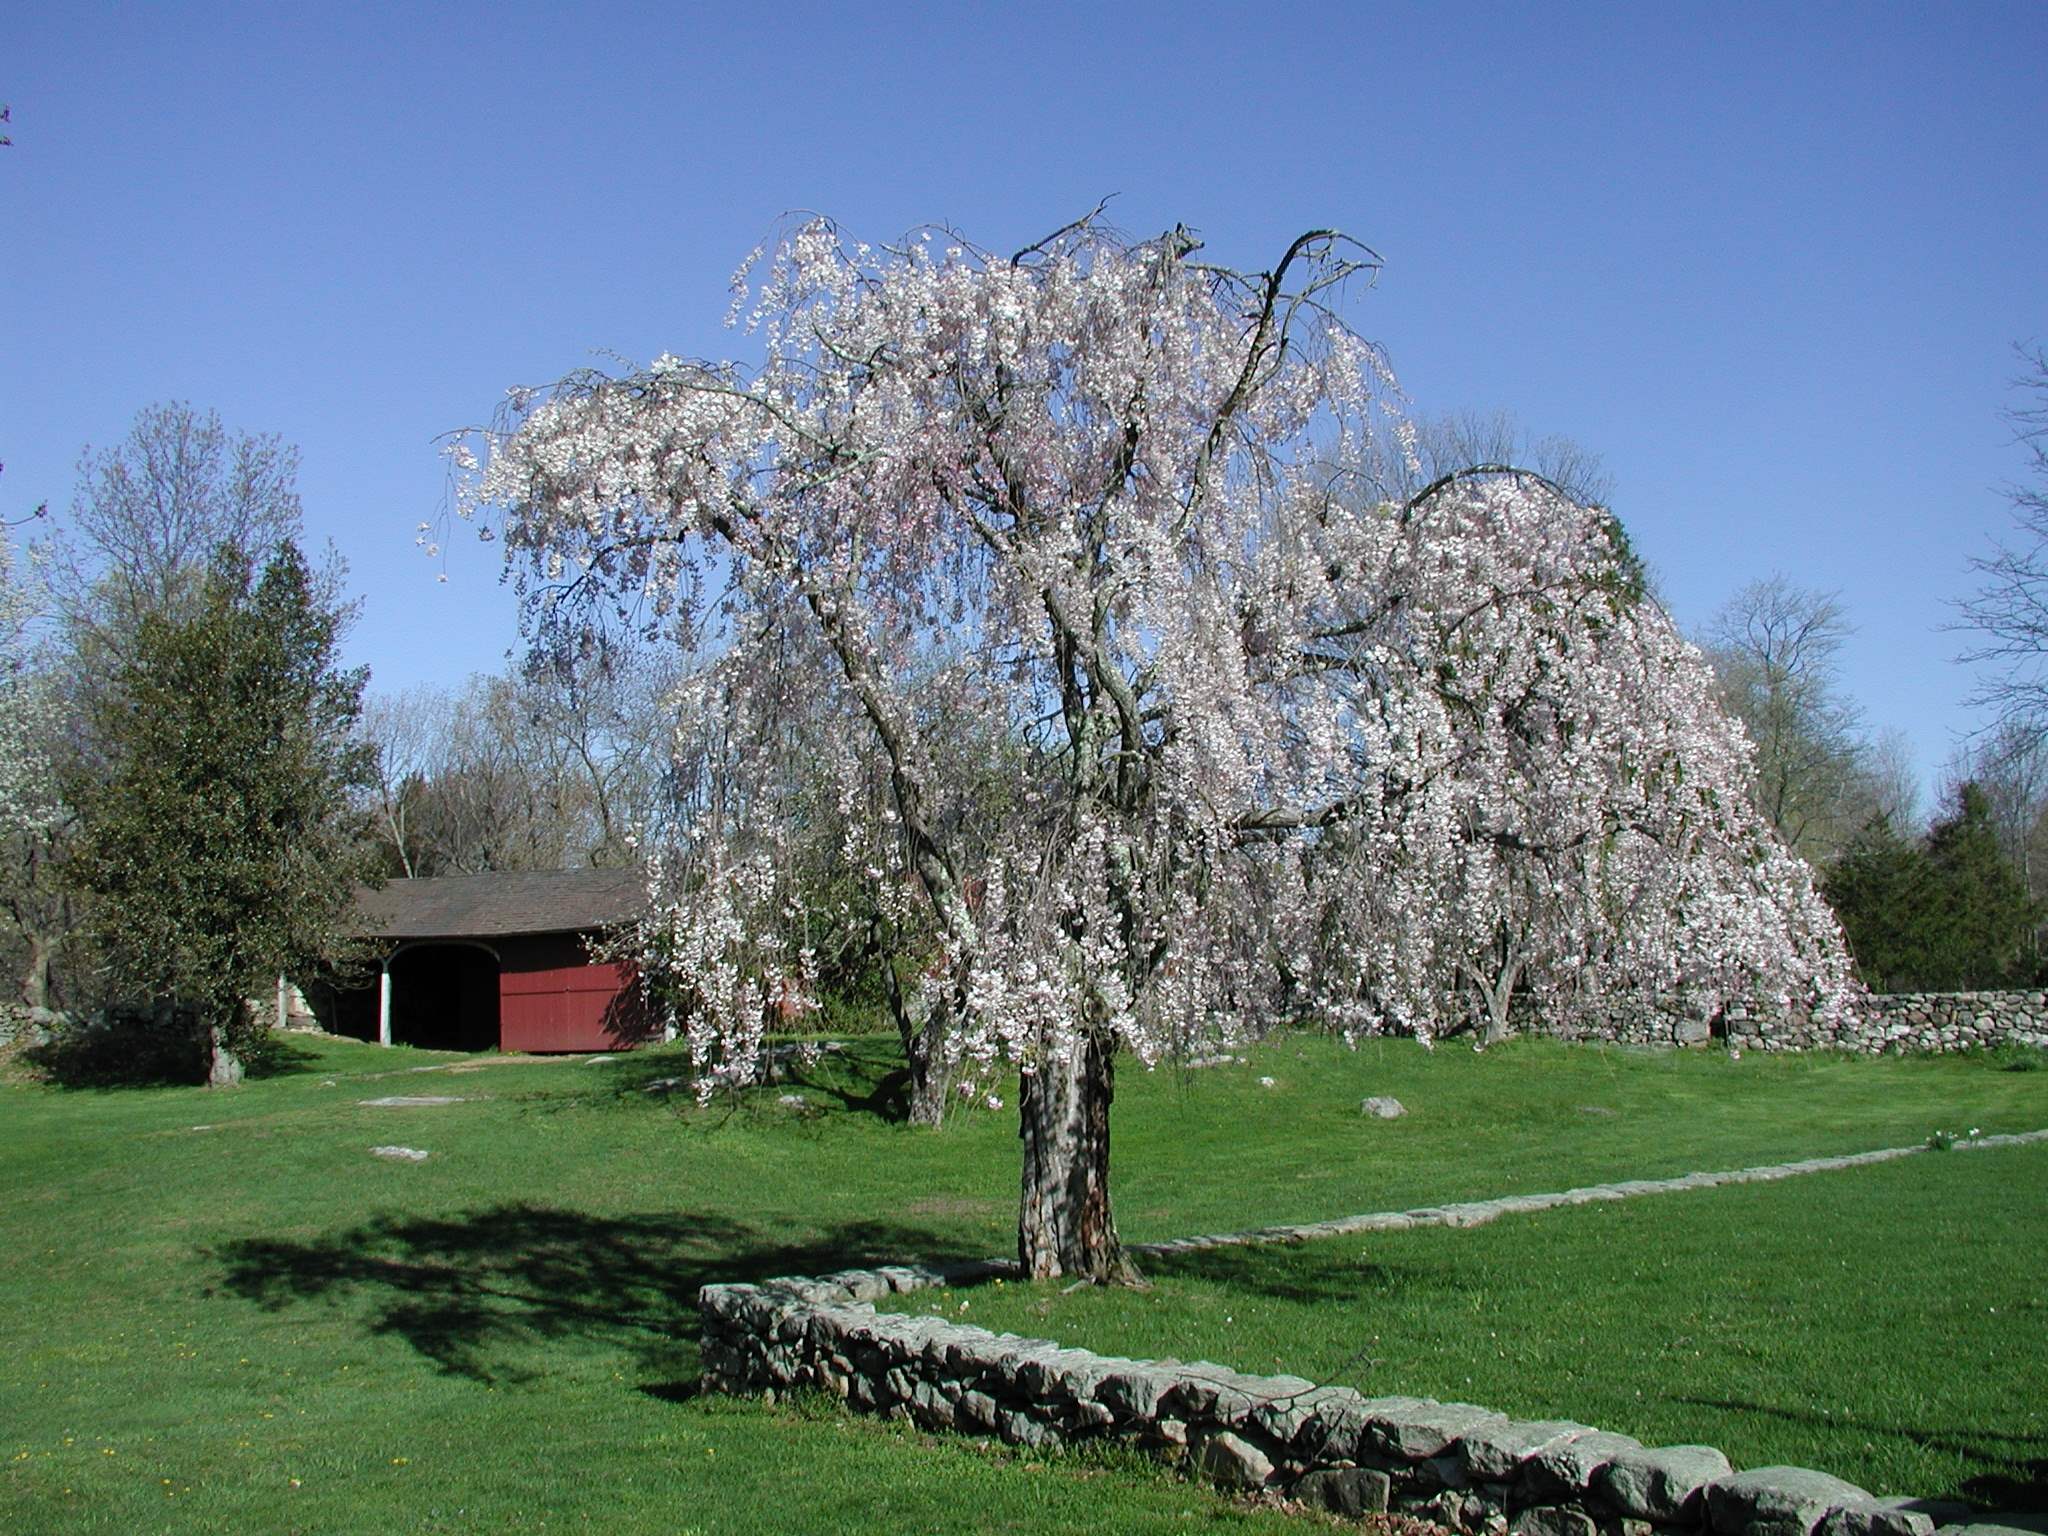 The Weeping Cherry tree in the terraced garden, with the woodshed behind.